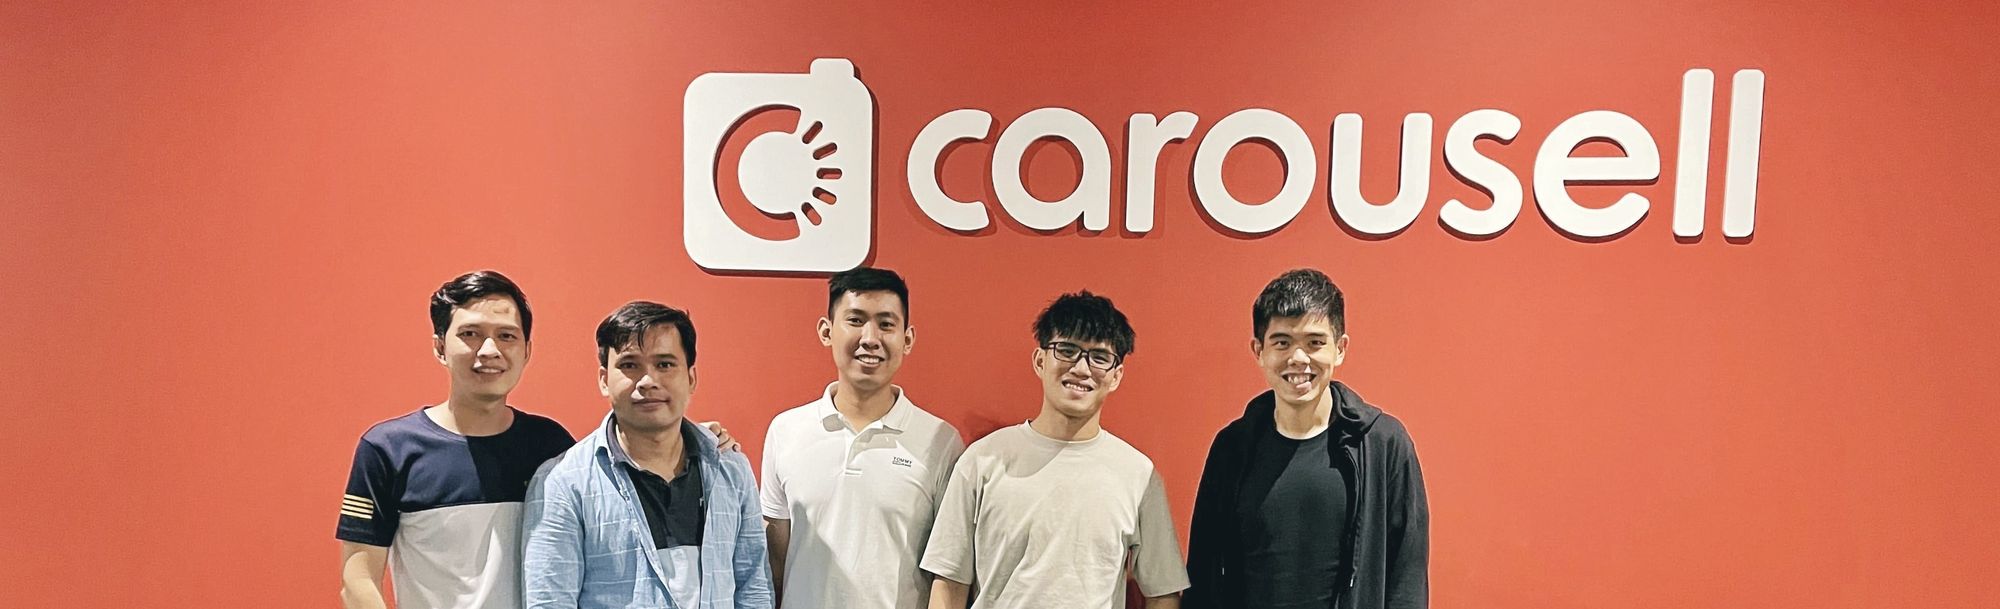 Client Strategy Manager - Carousell Media Group